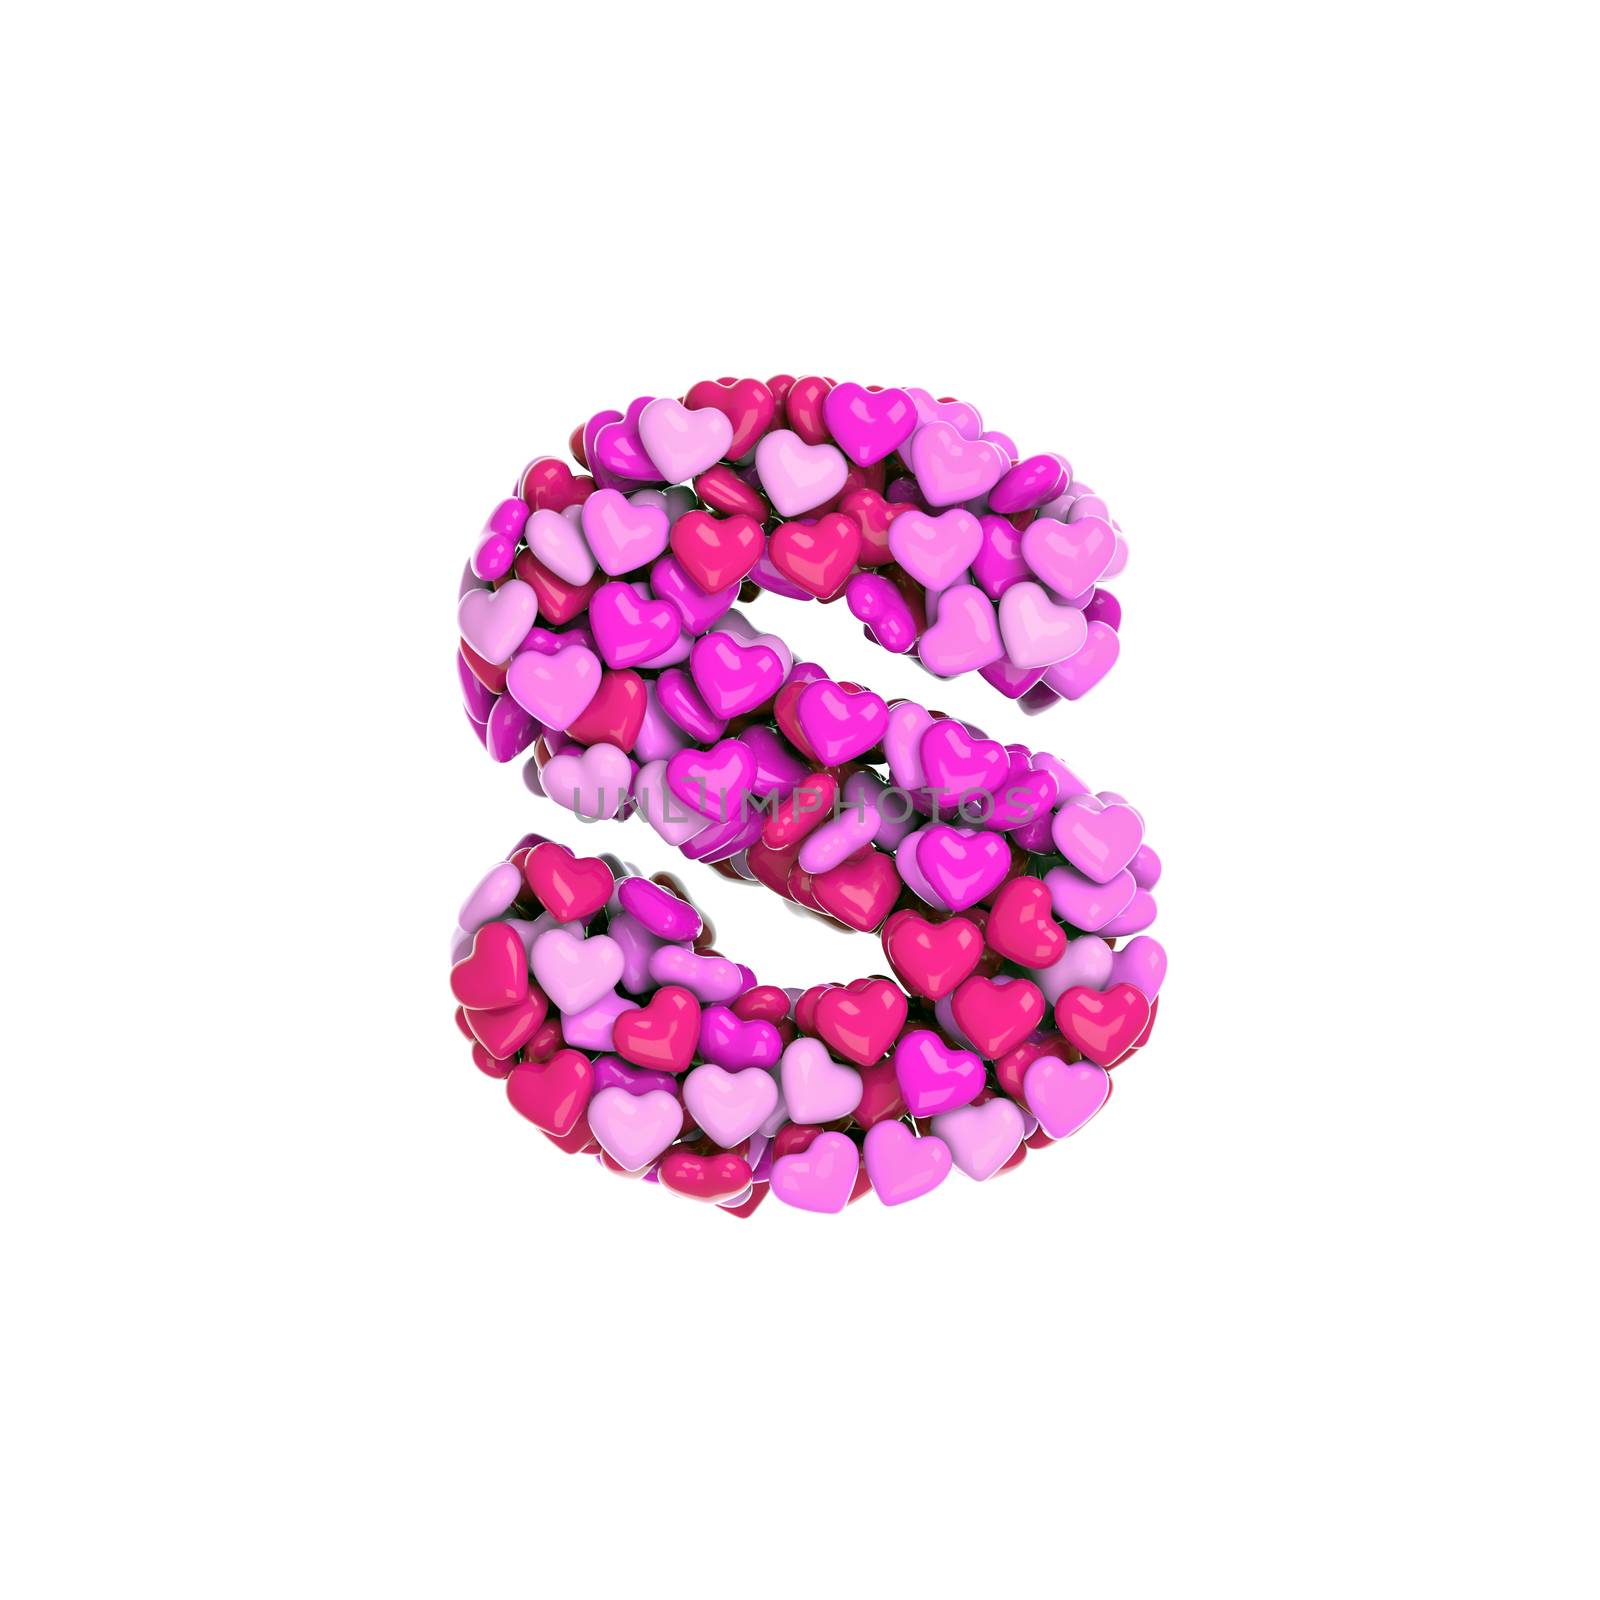 Valentine letter S - Lowercase 3d pink hearts font - Love, passion or wedding concept by chrisroll